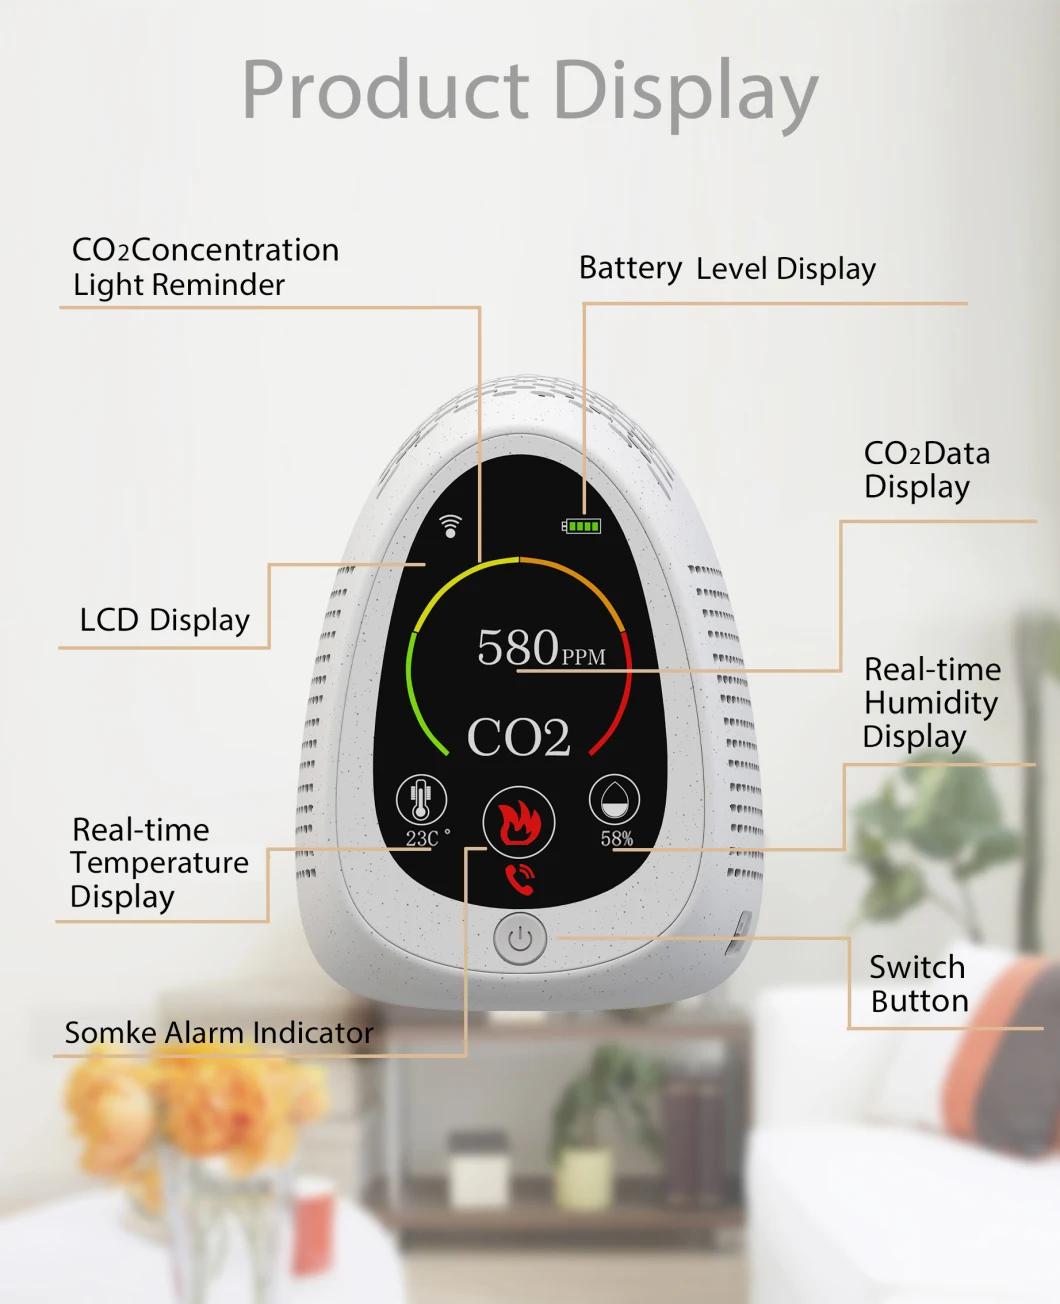 Factory Supply Fast-Response Home Safety CO2 Meter Detector for Fire Smoke Alarm System